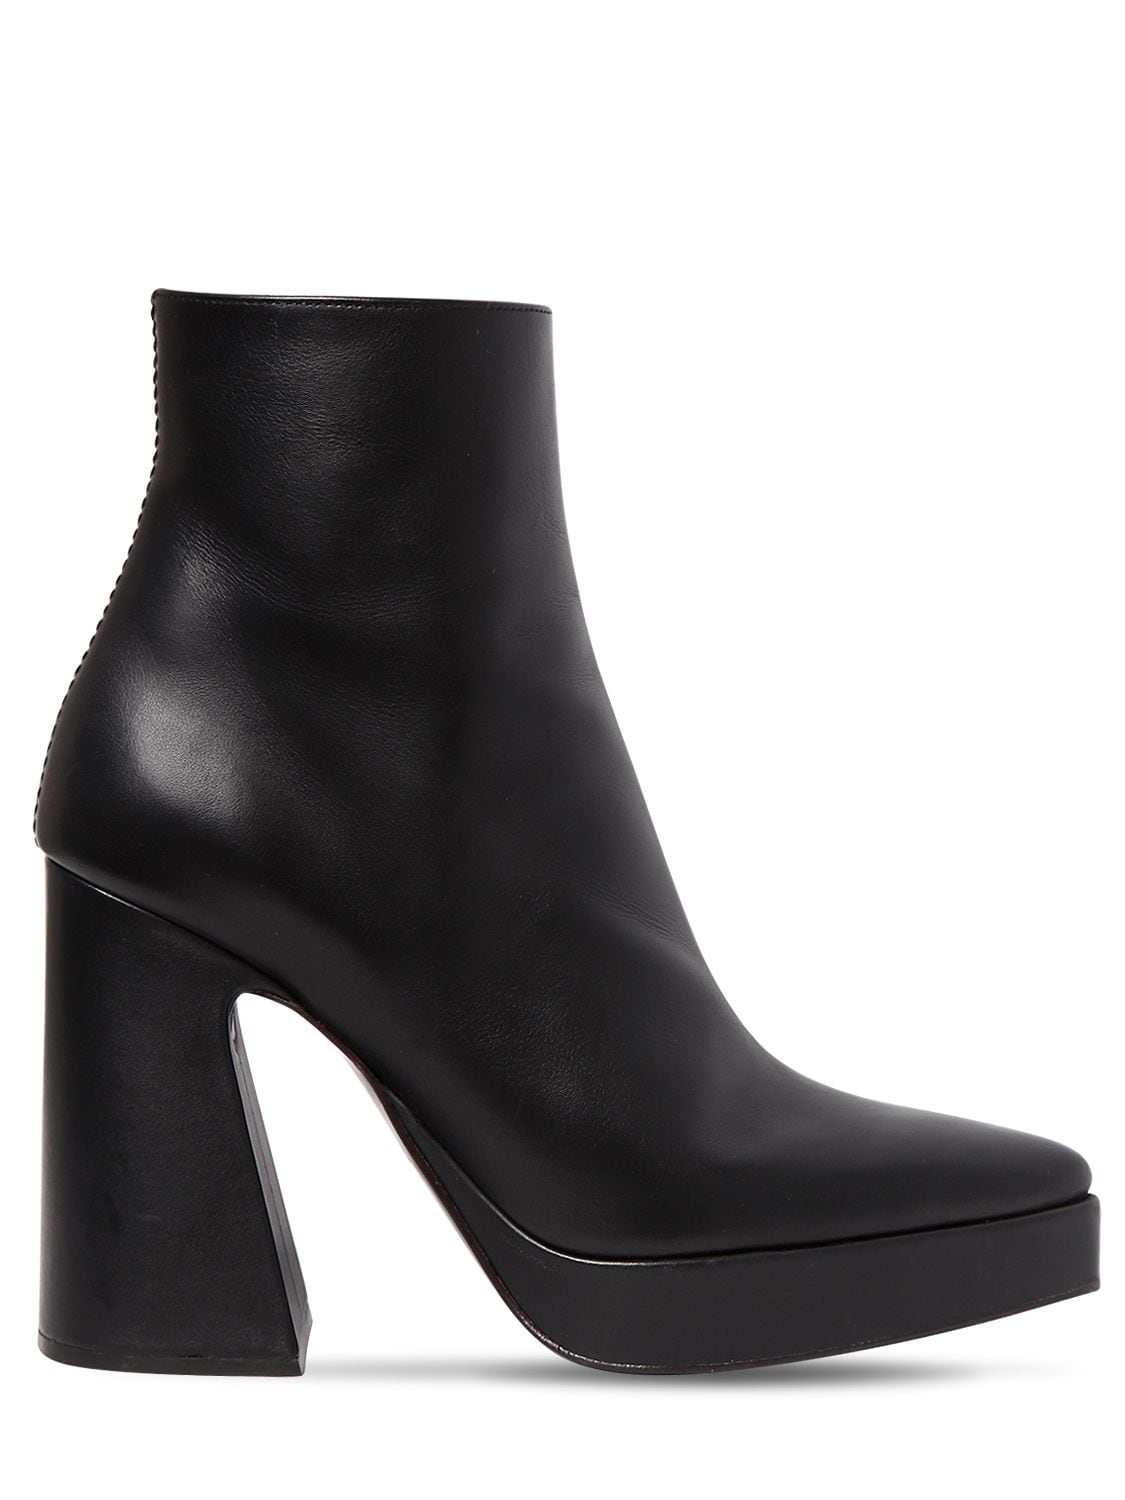 PROENZA SCHOULER 105MM LEATHER PLATFORM ANKLE BOOTS,68IIAX002-MDGYOTY1